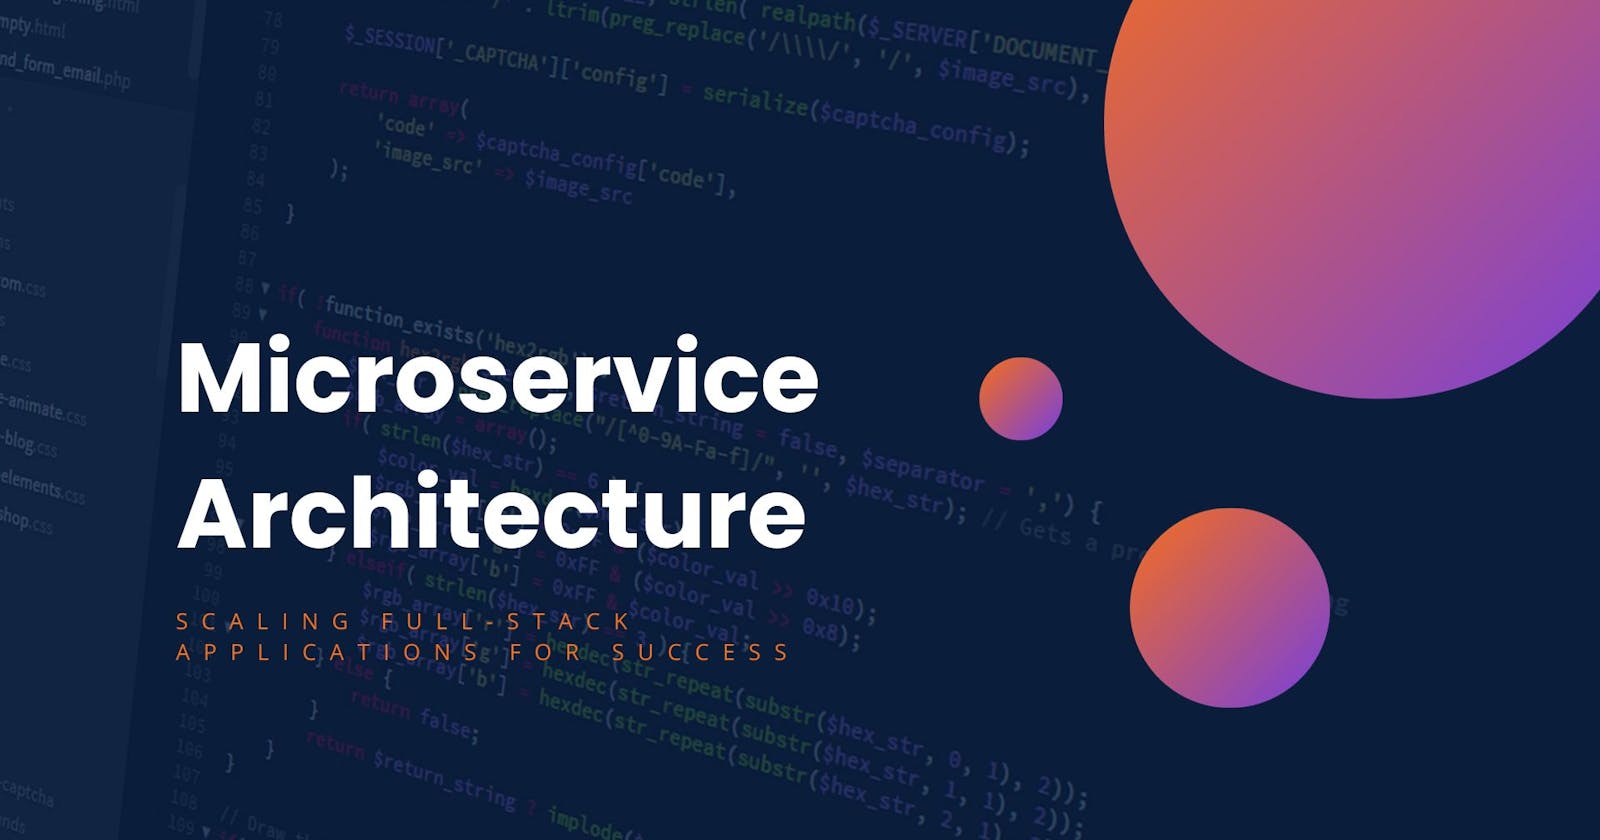 Microservice Architecture: Scaling Full-Stack Applications for Success